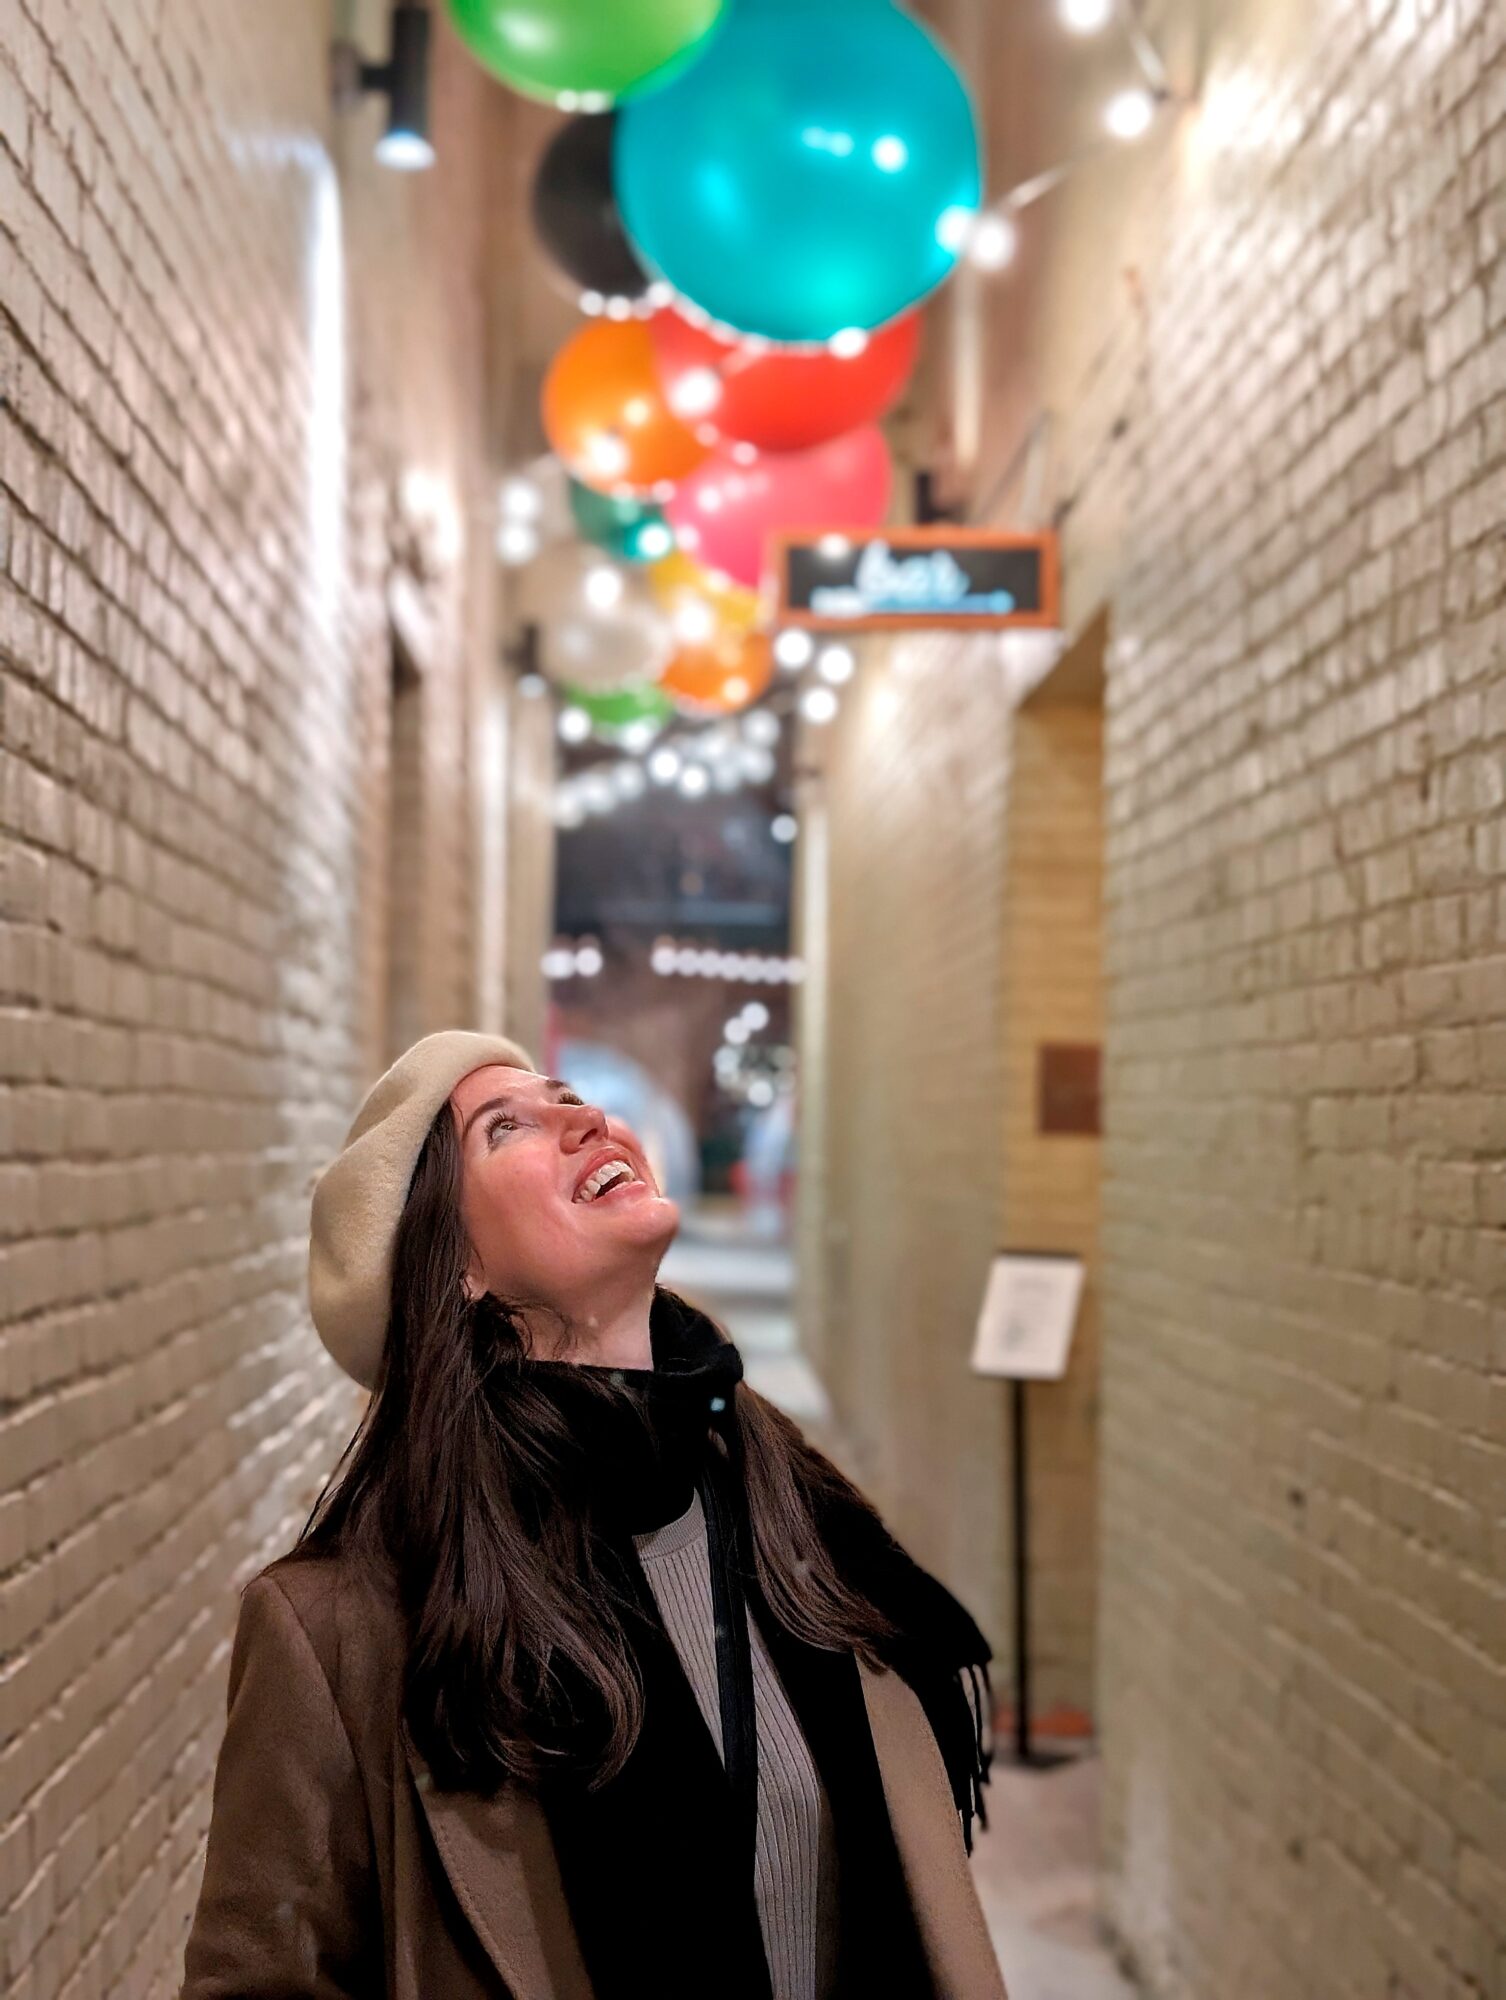 Alyssa looks up at bright balloons in an alley